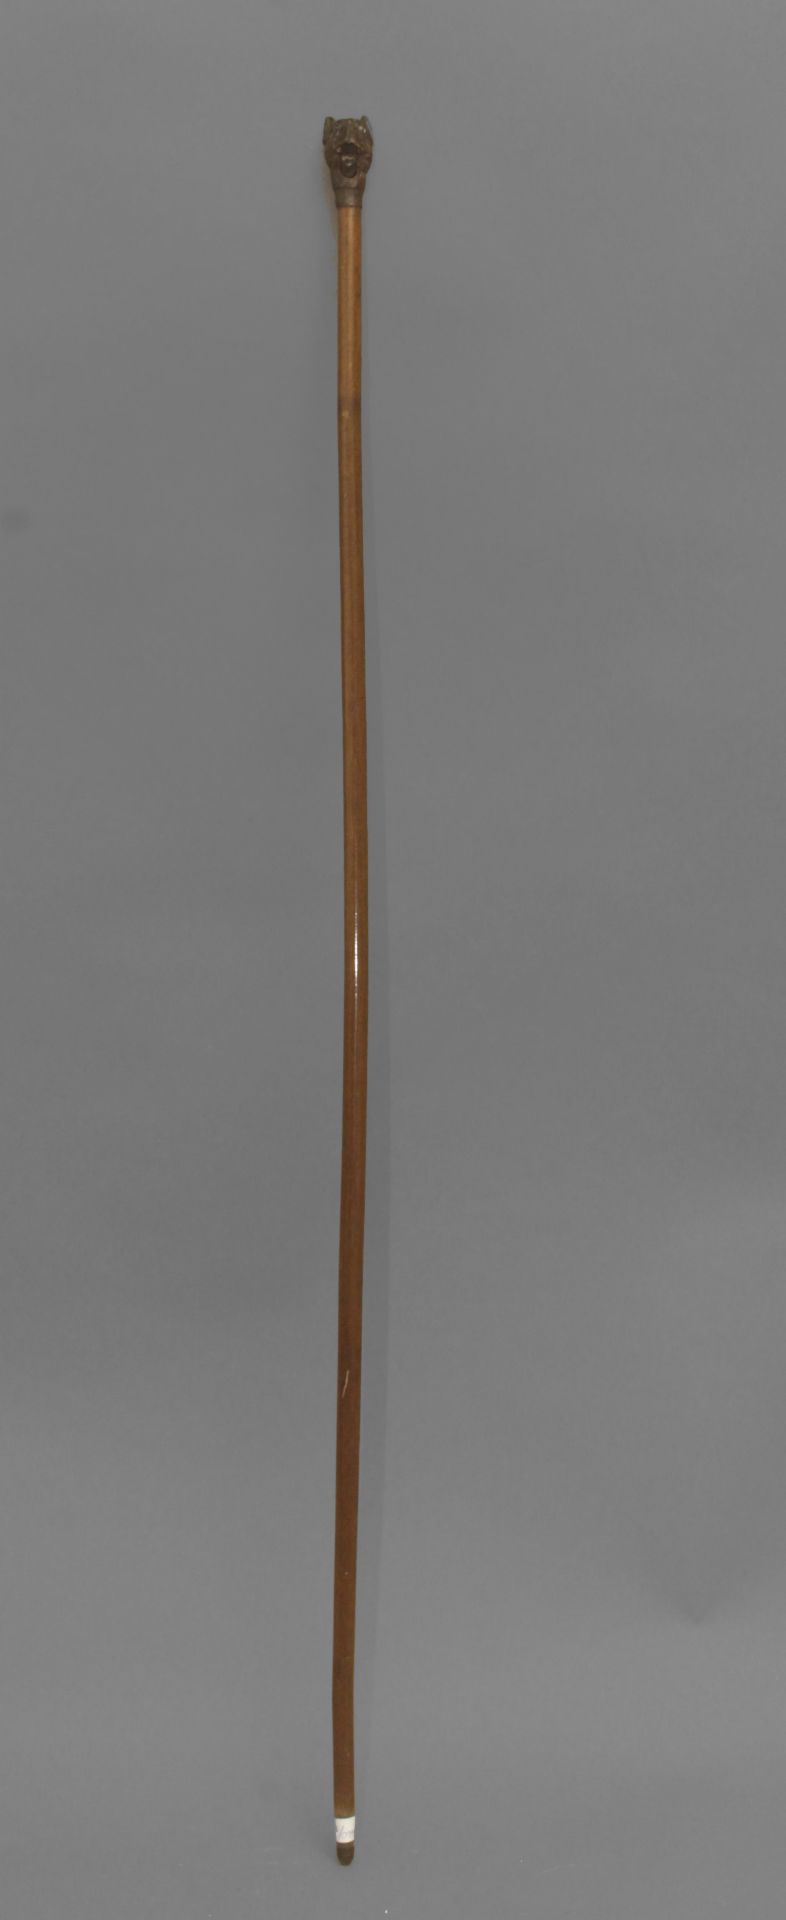 A 19th century walking stick - Image 2 of 4